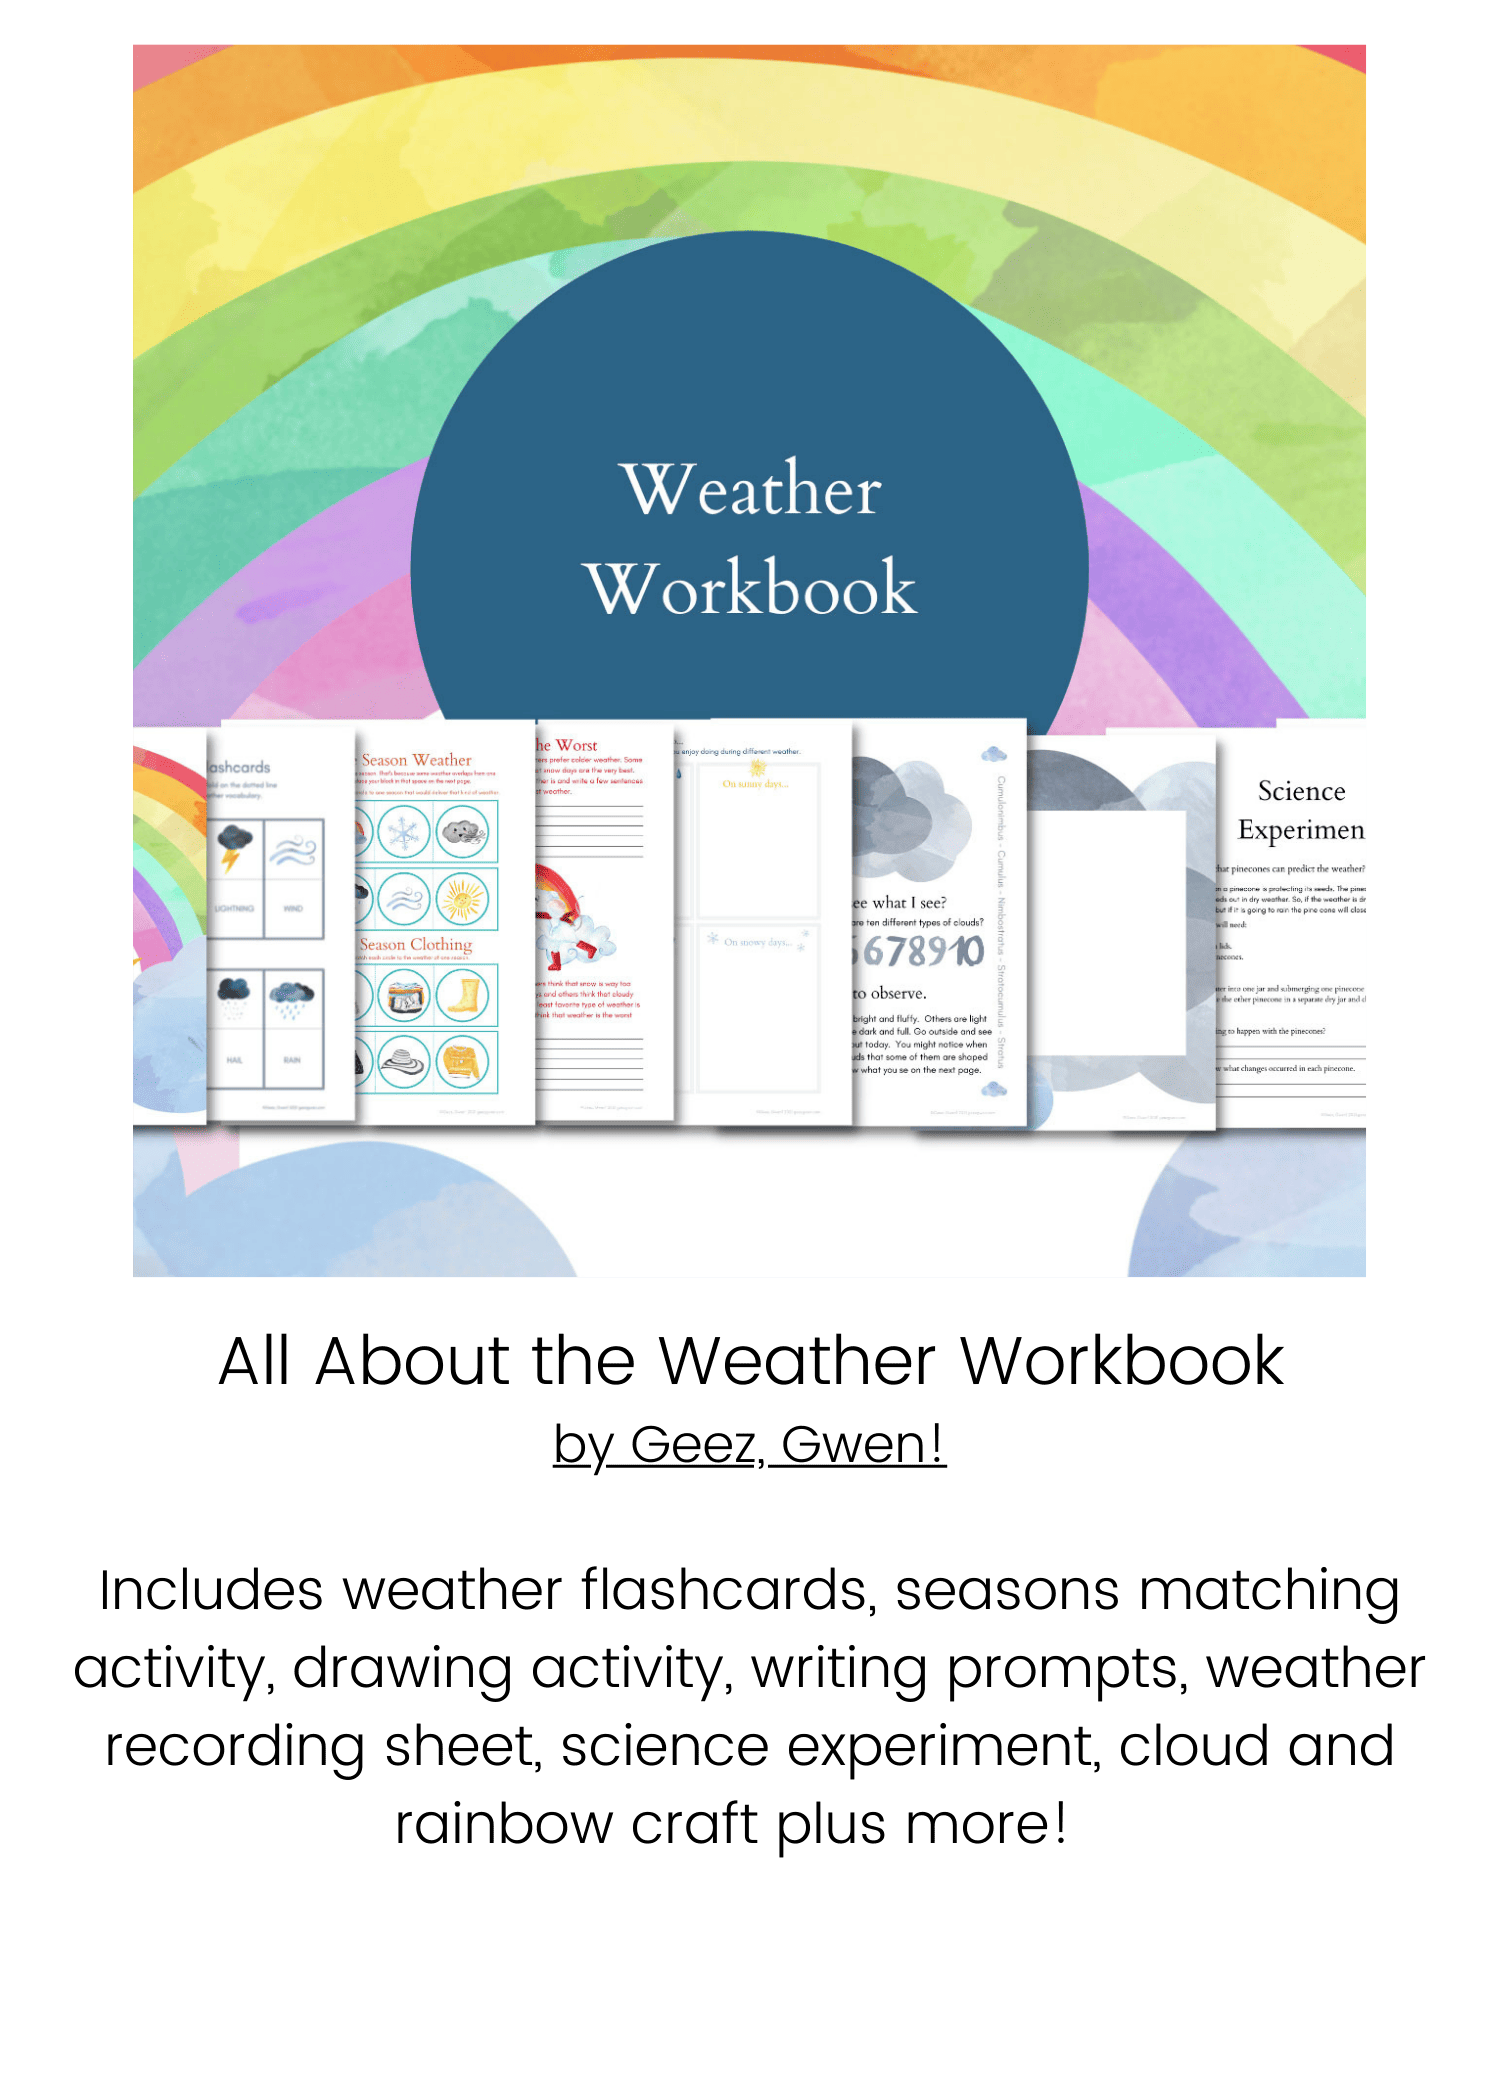 All About the Weather Workbook Bundle Info